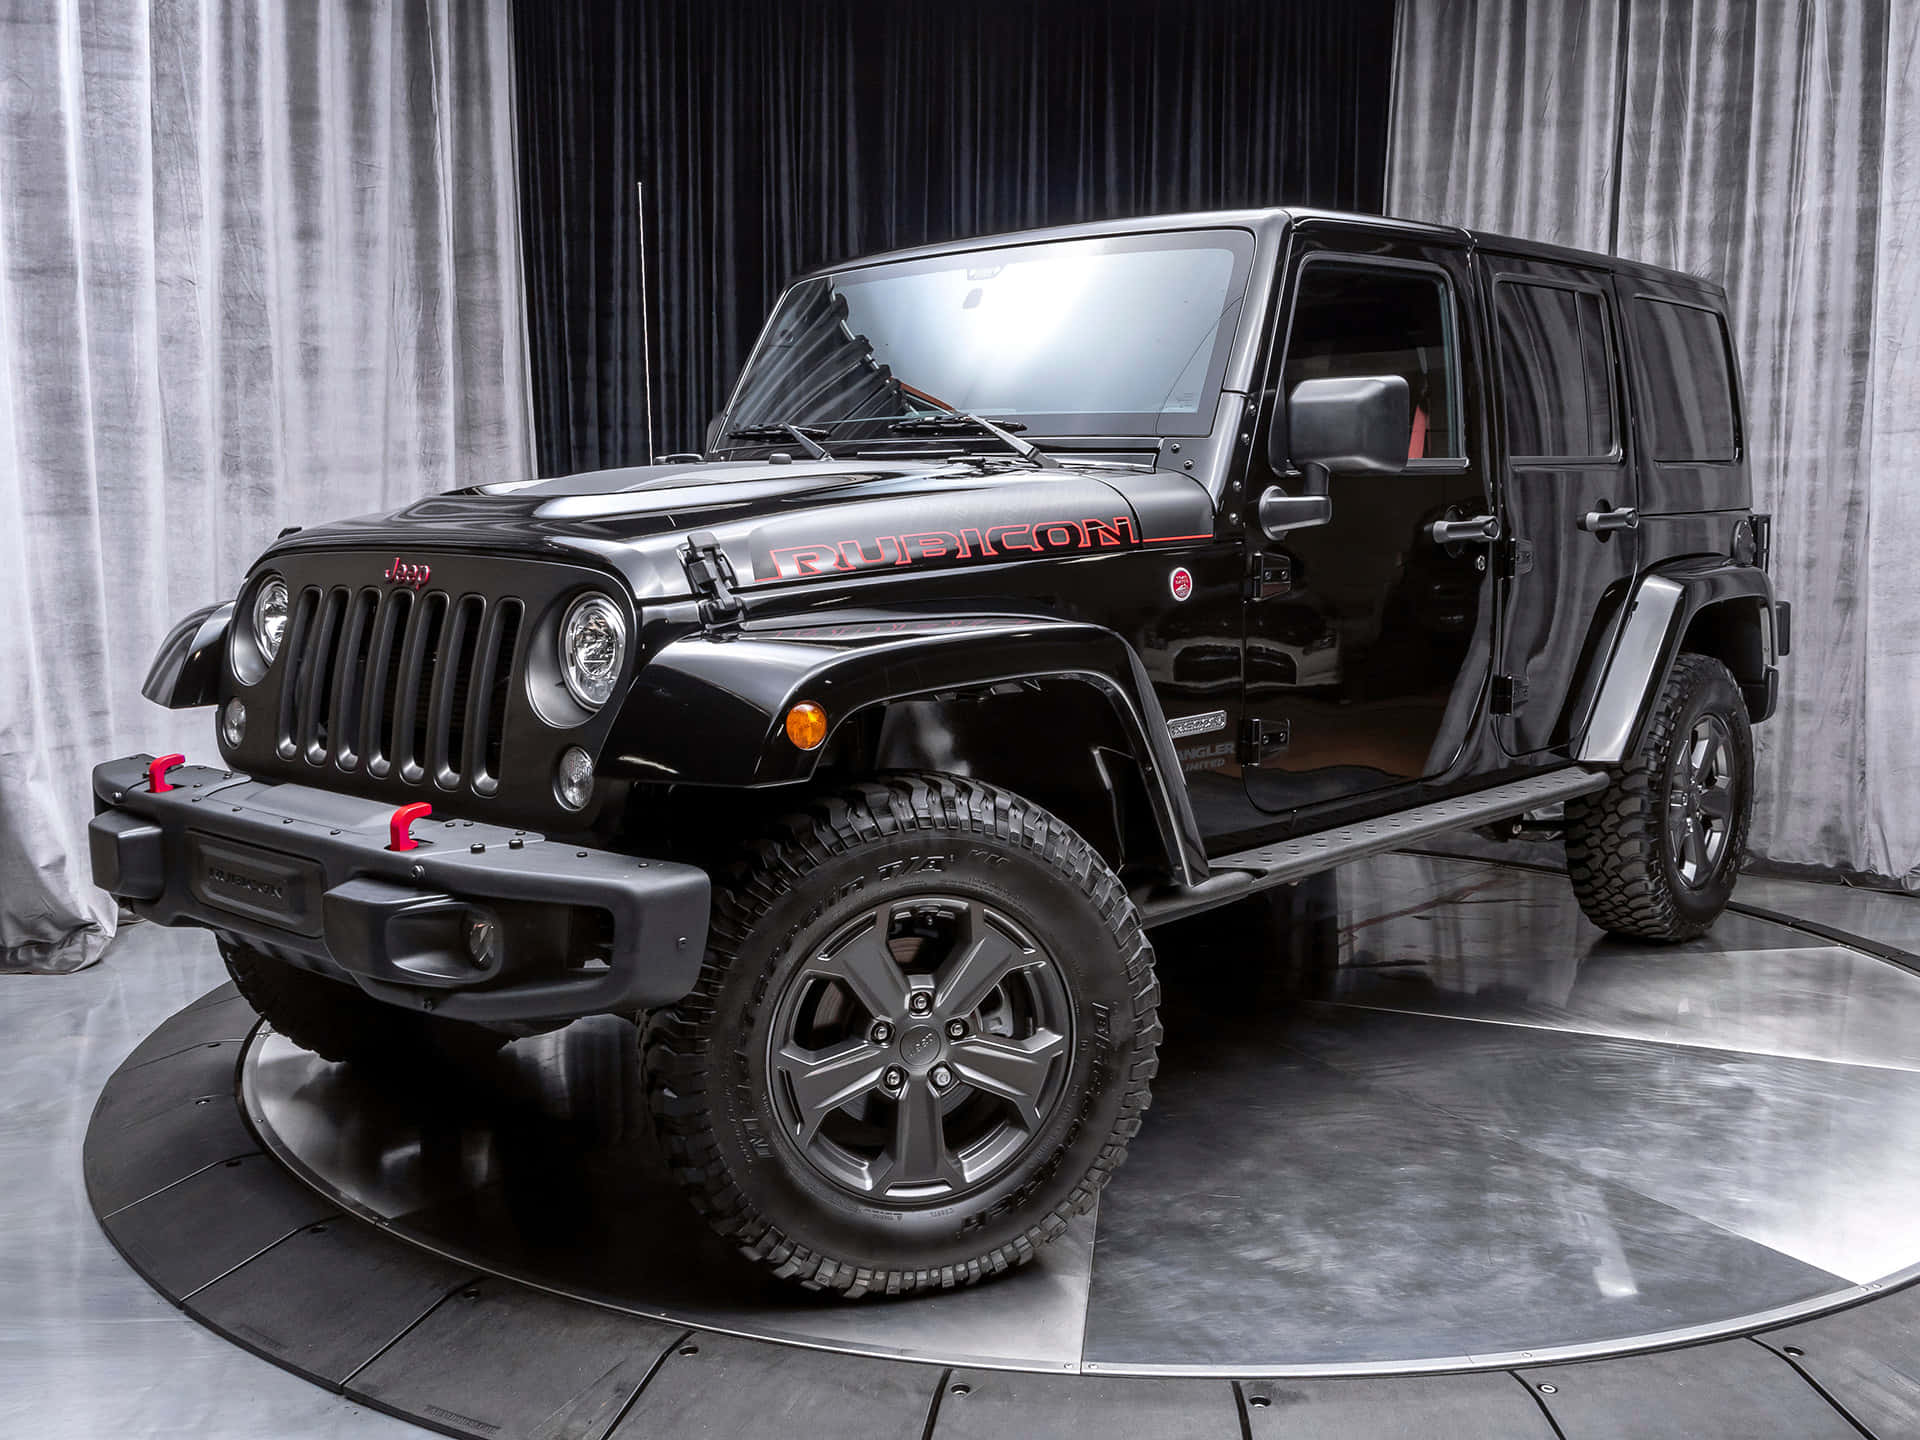 A Black Jeep Is Parked On A Circular Platform